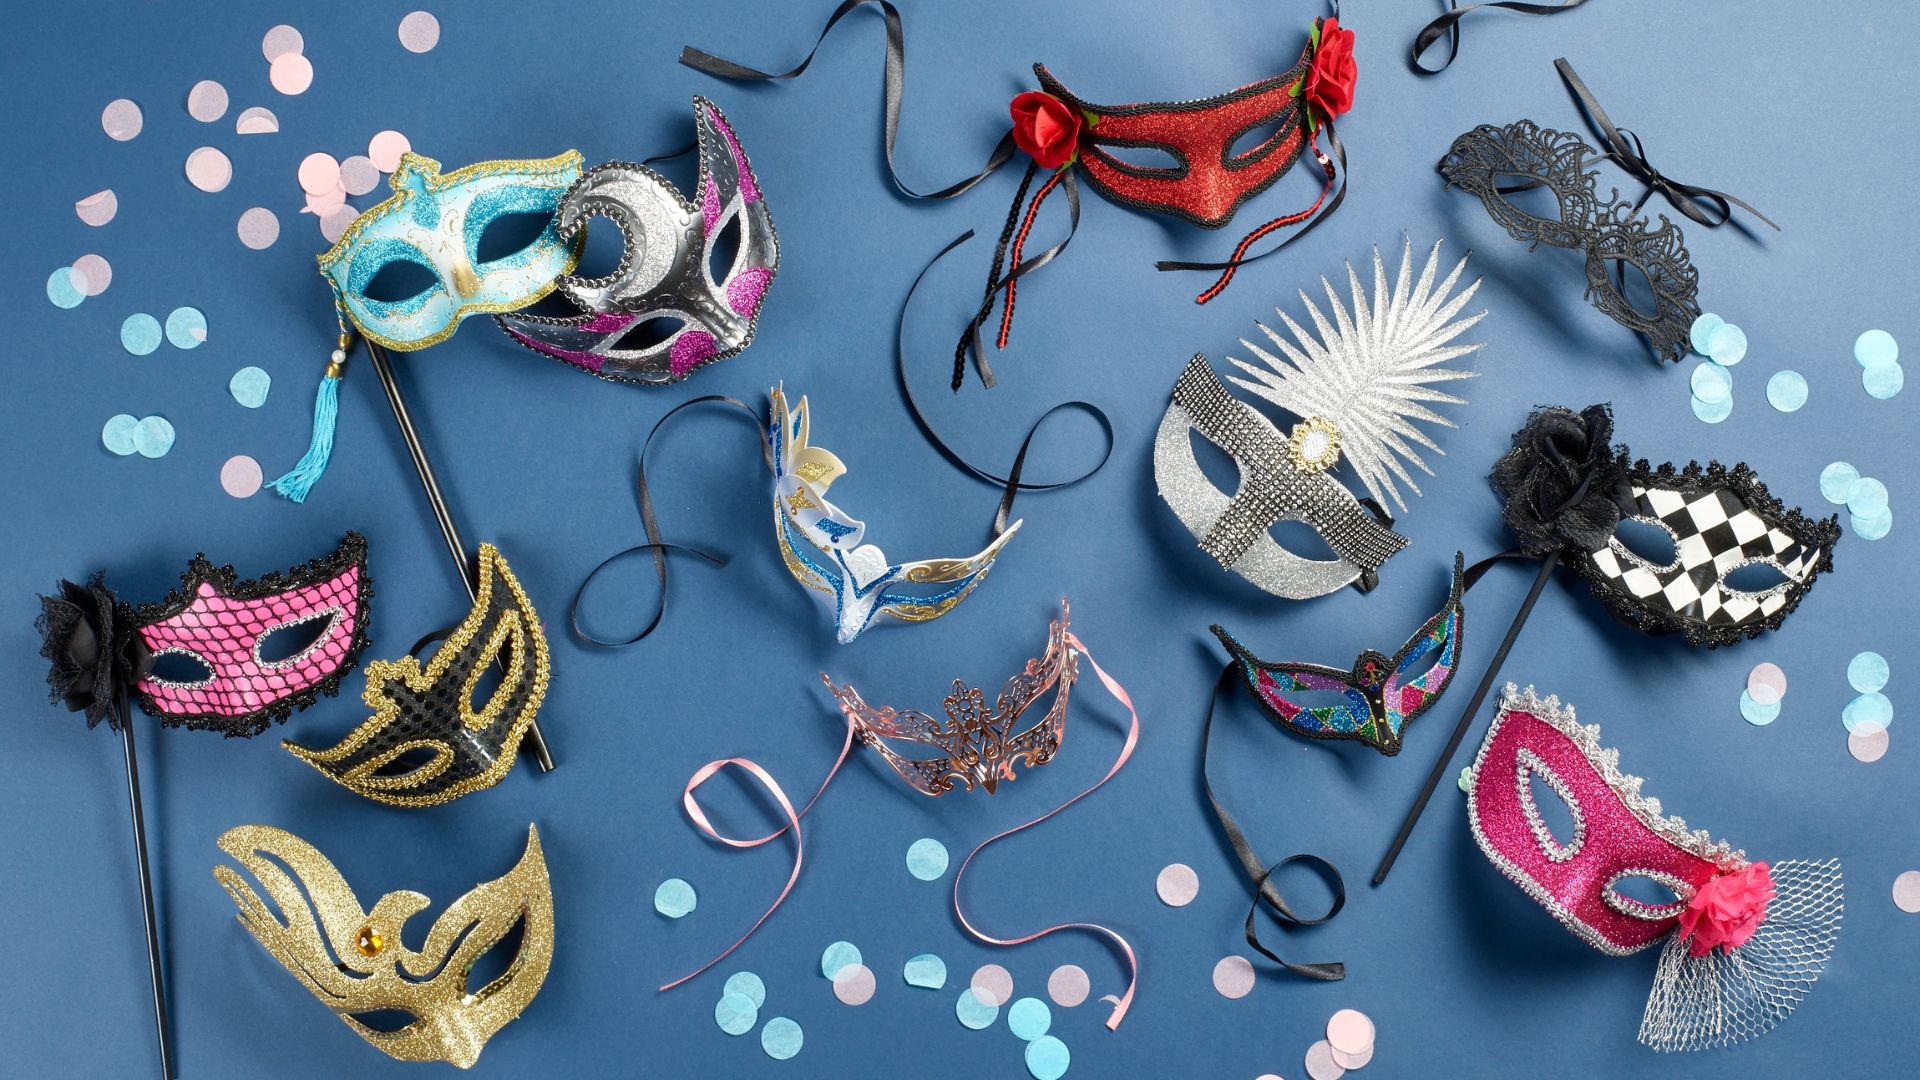 5 Steps To Throwing A Masquerade Party